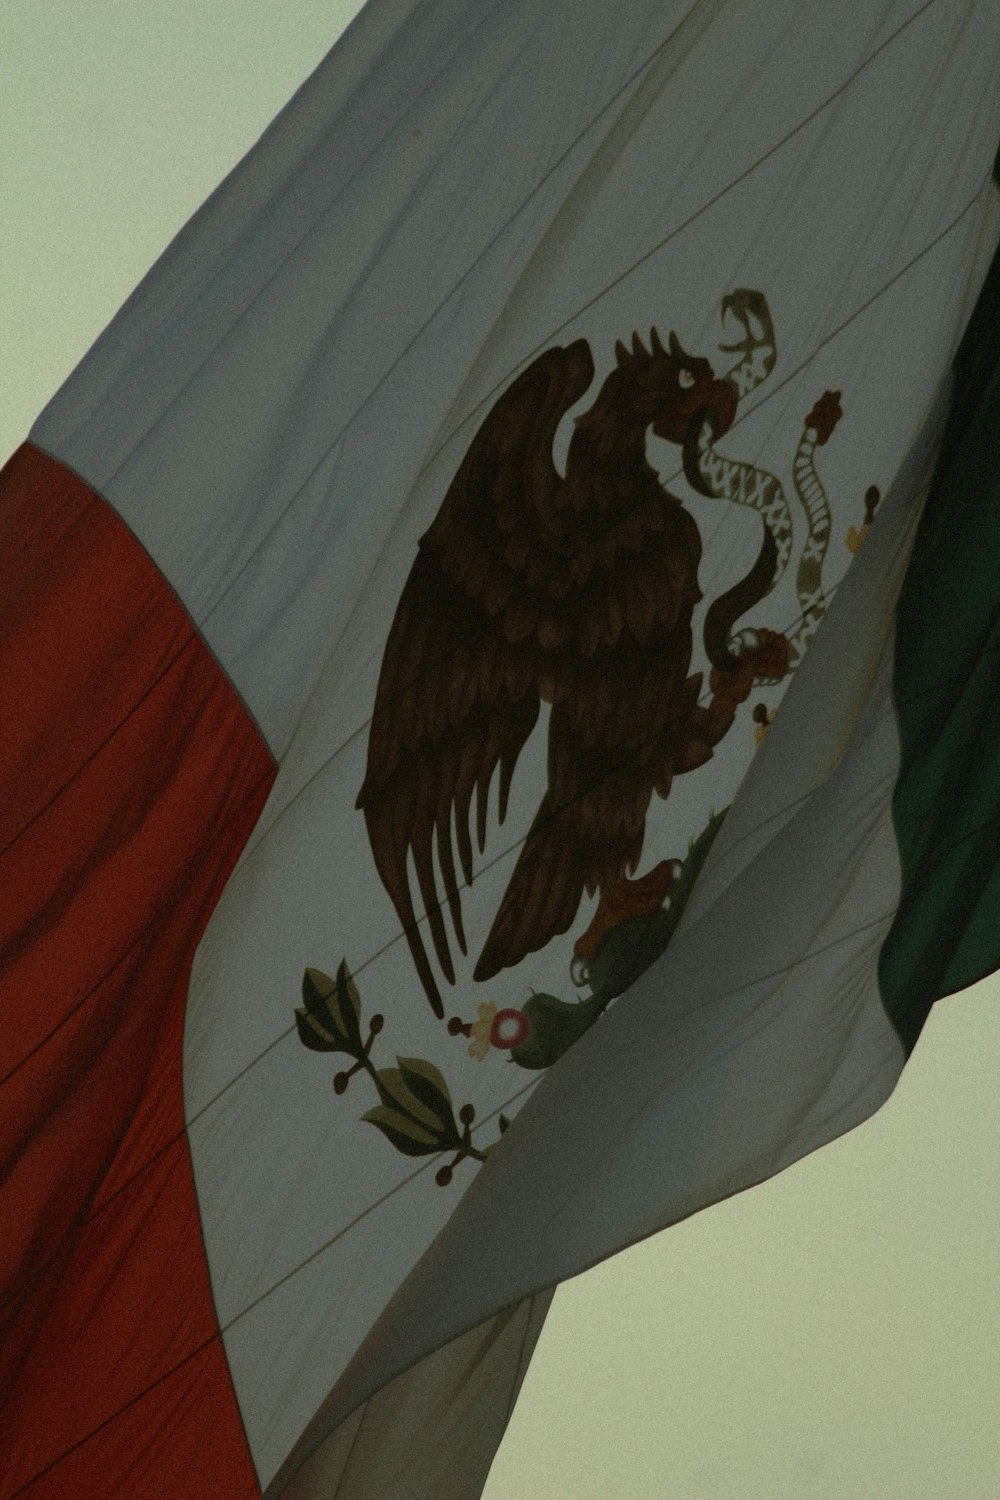 the flag of mexico is waving in the wind